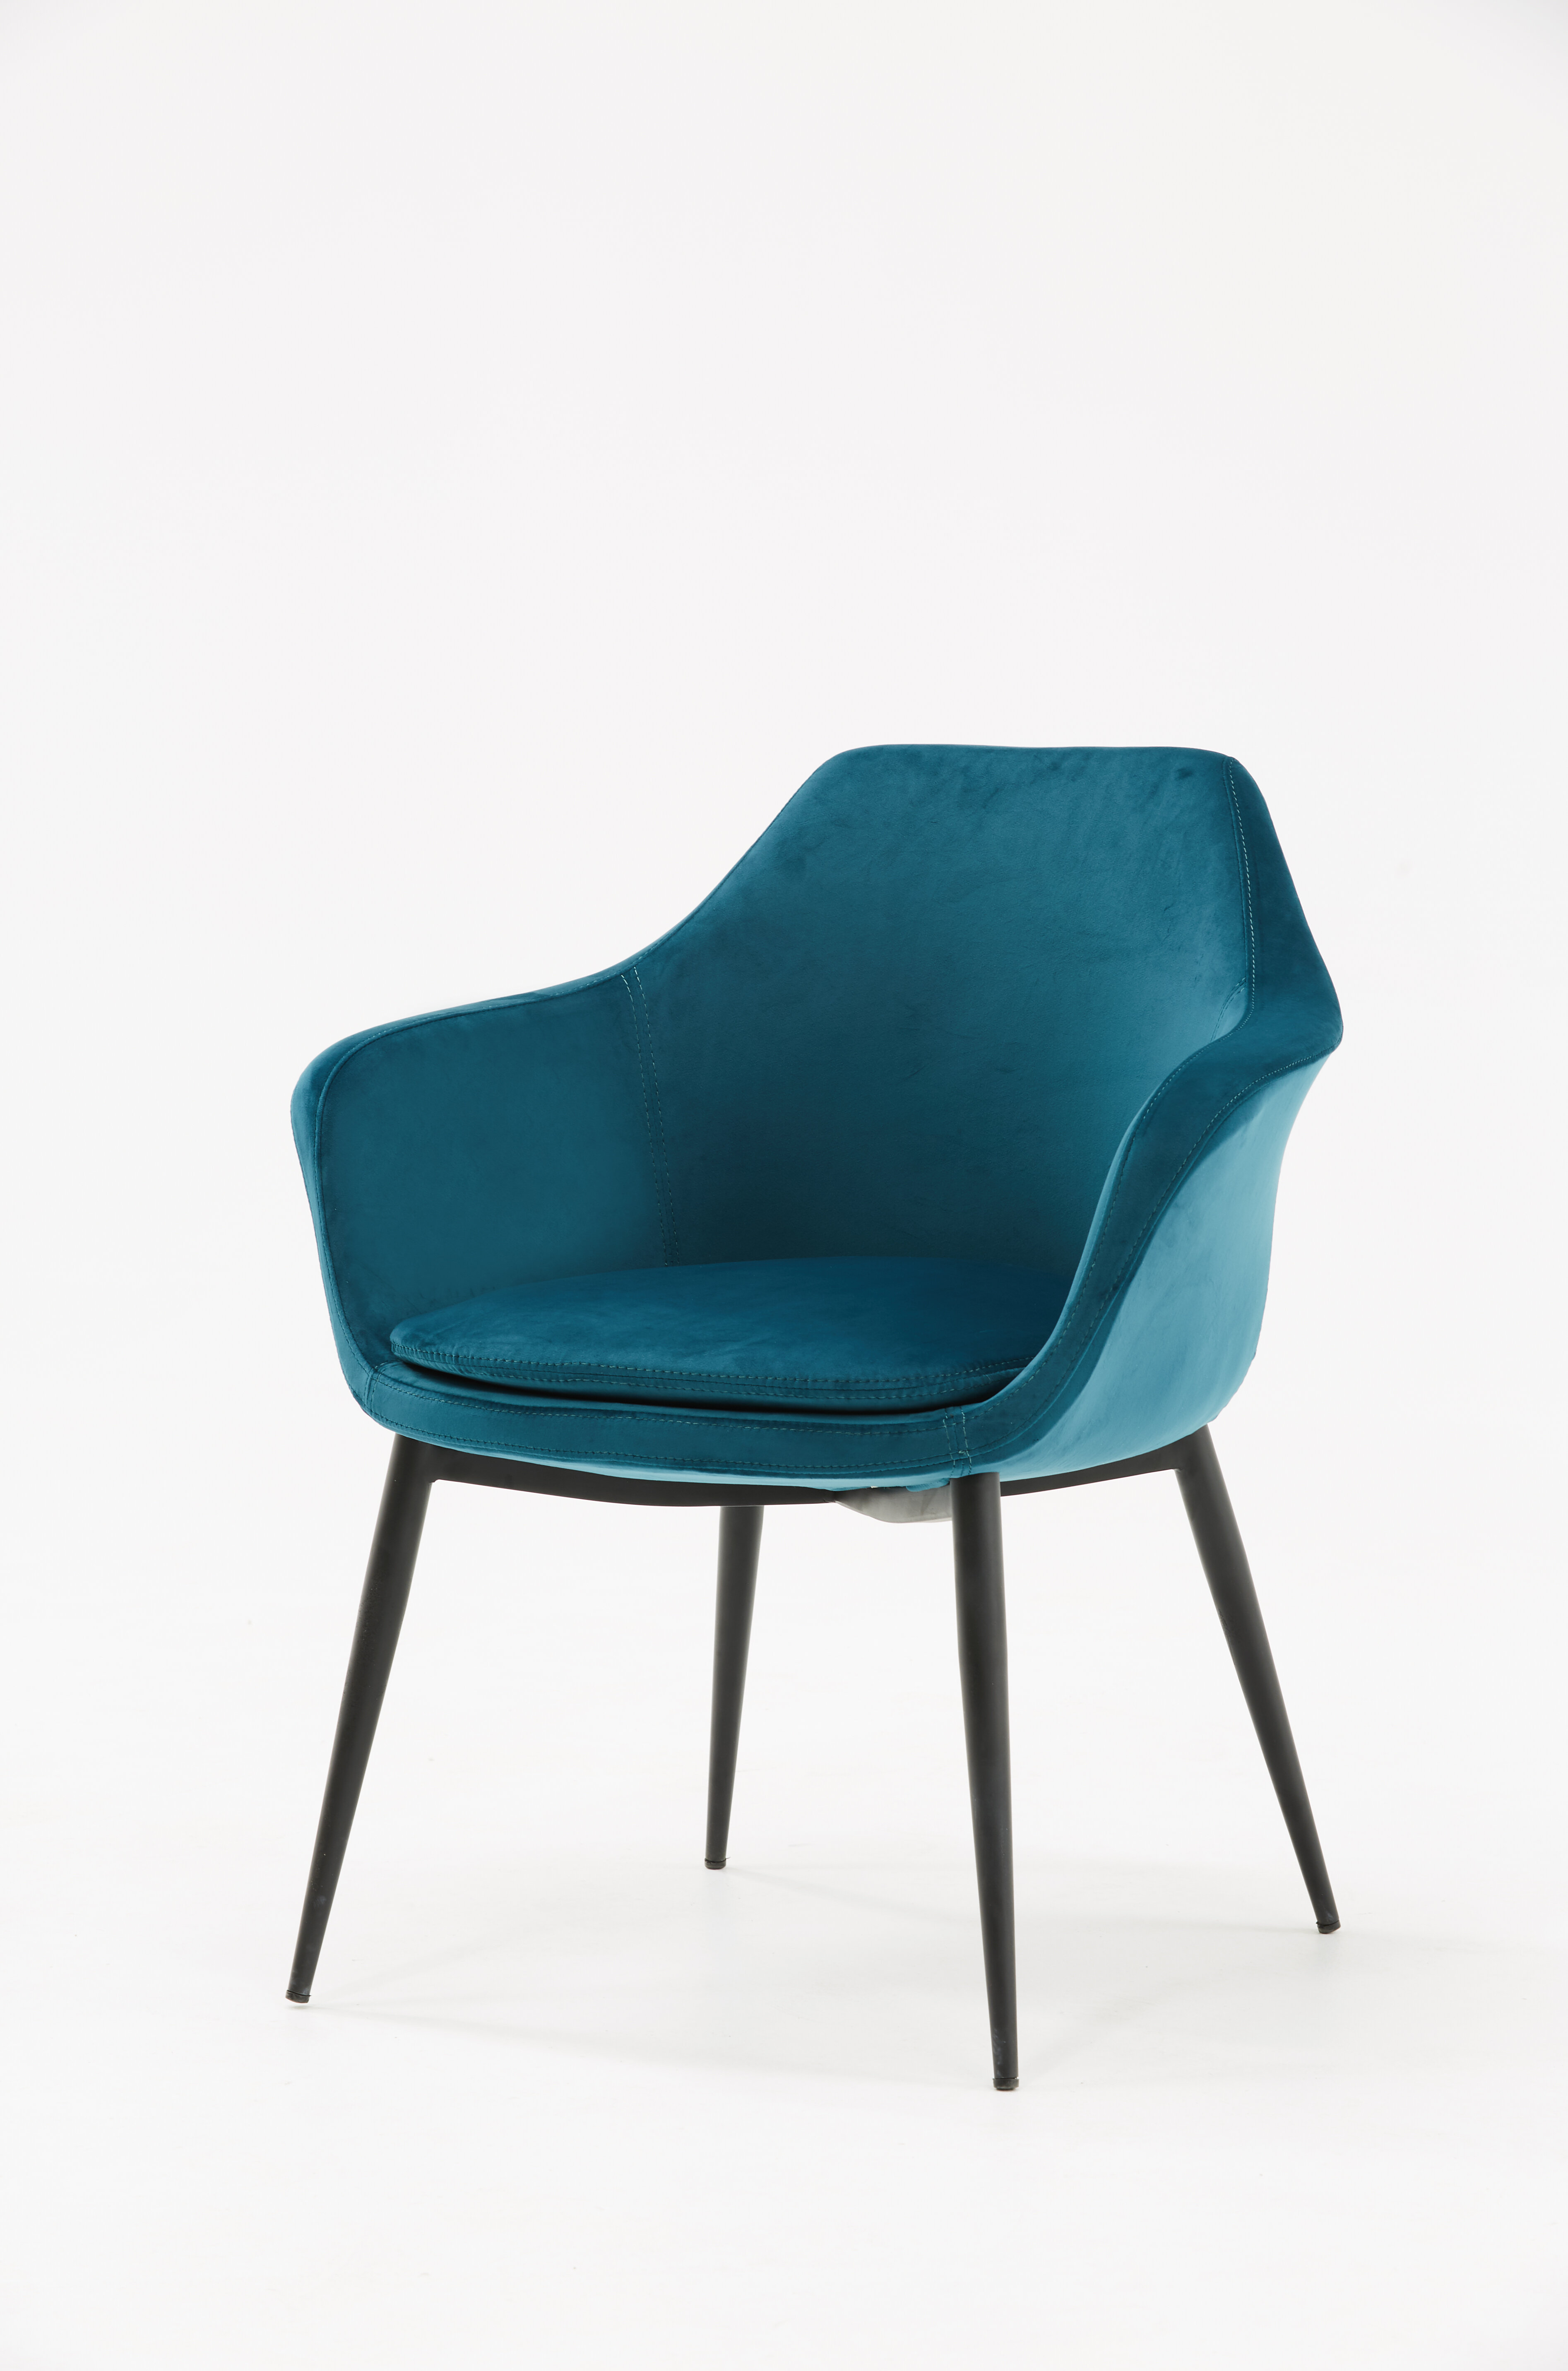 teal dining chairs with arms